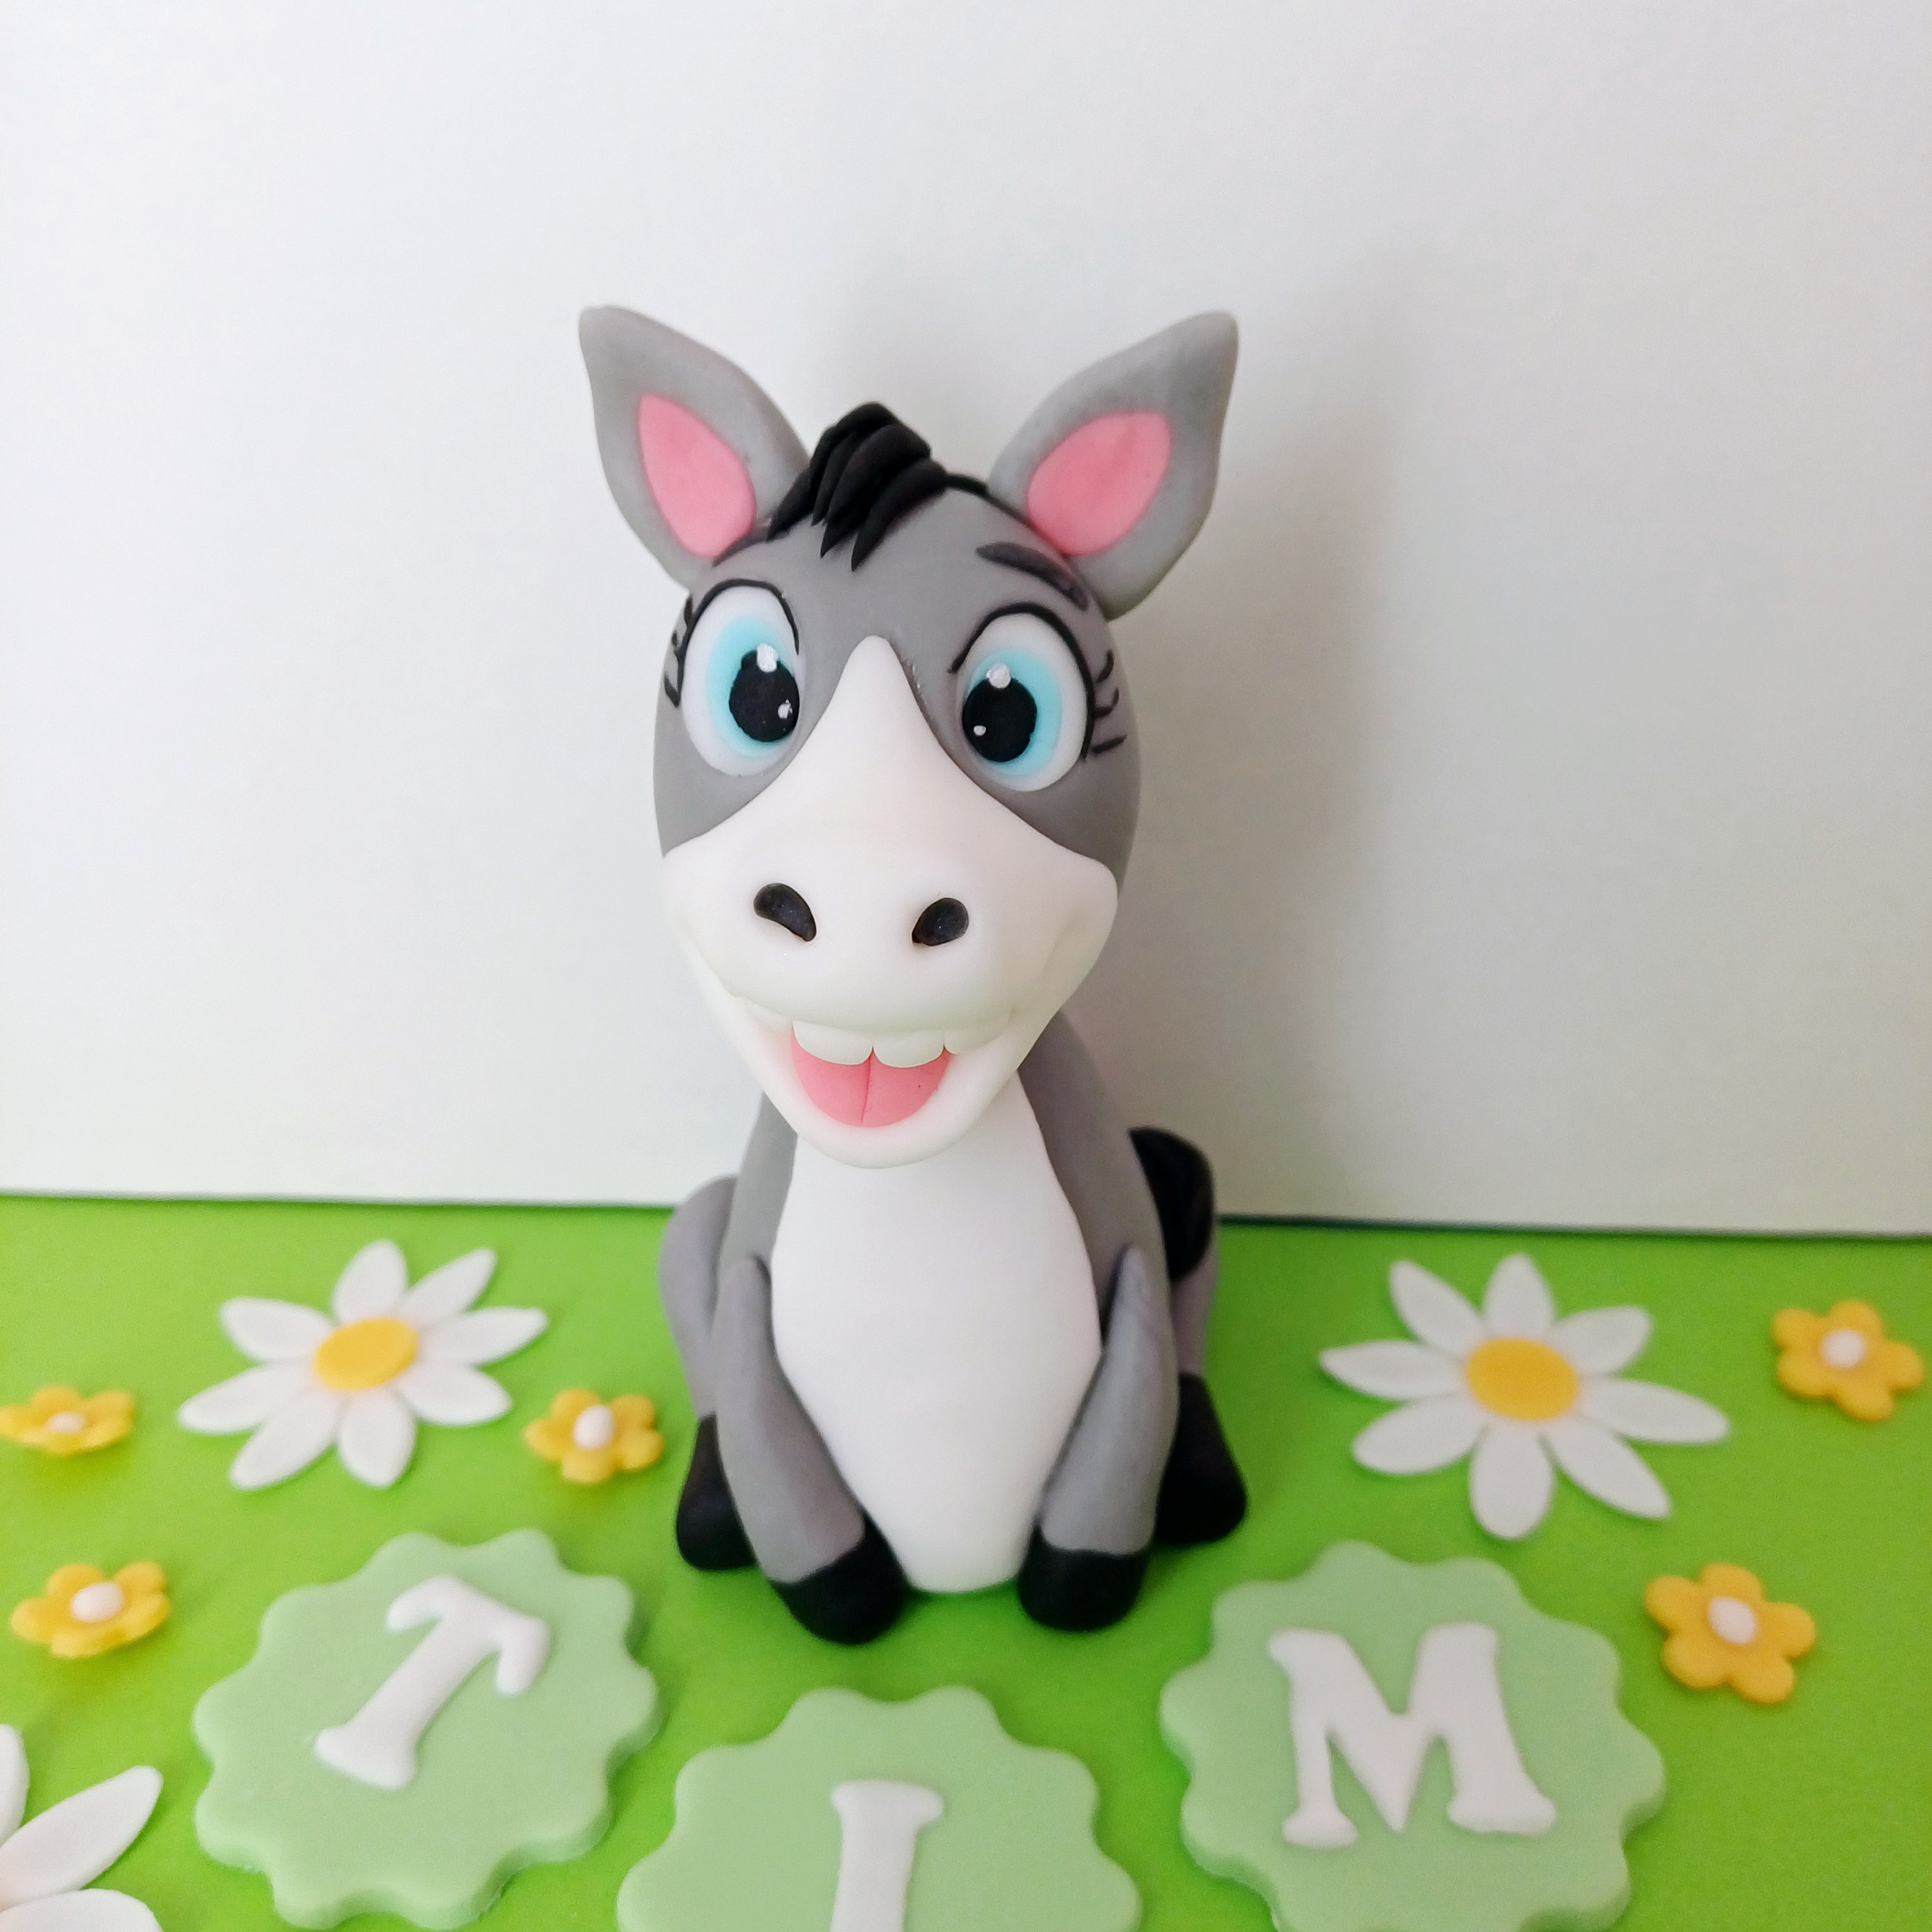 Donkey Hodie Birthday Cake | Recipes for Kids | PBS KIDS for Parents